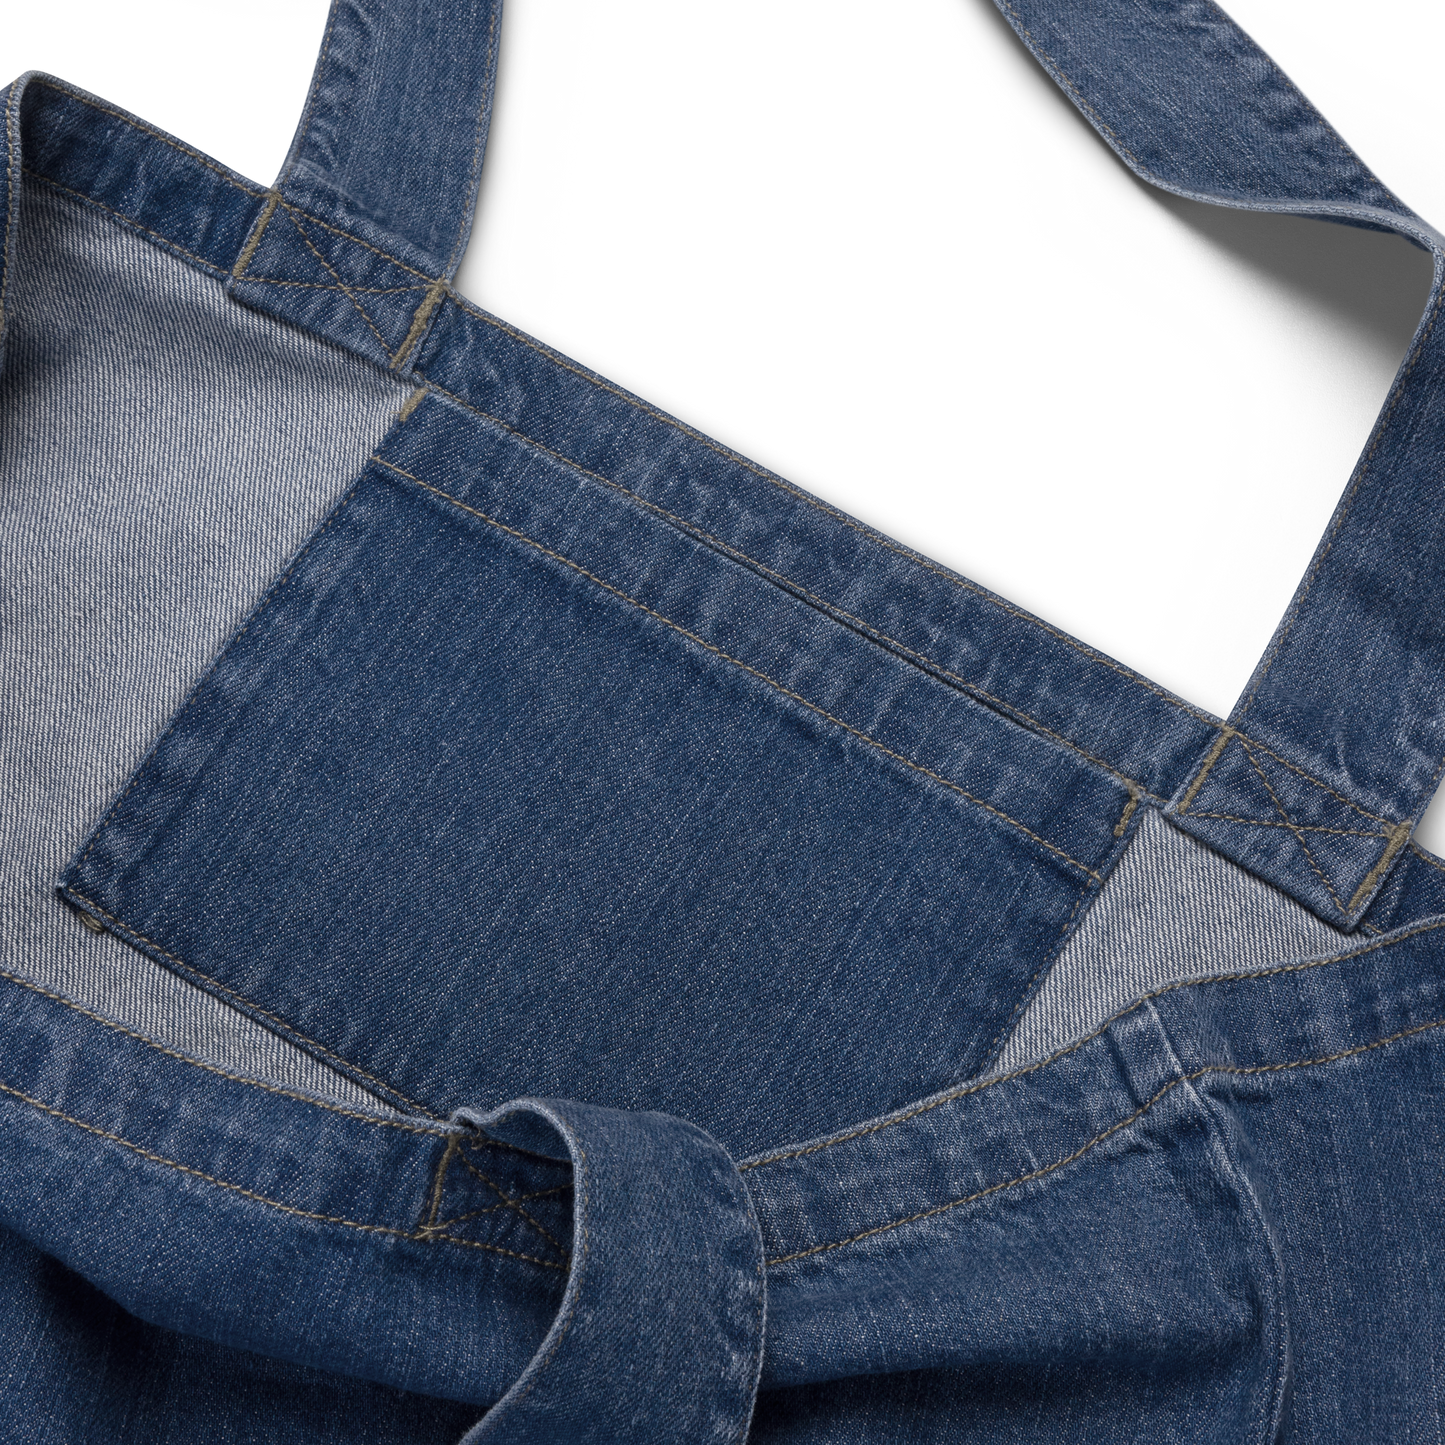 They Call Us Ghetto, And Then They Copy. Organic Denim Tote Bag